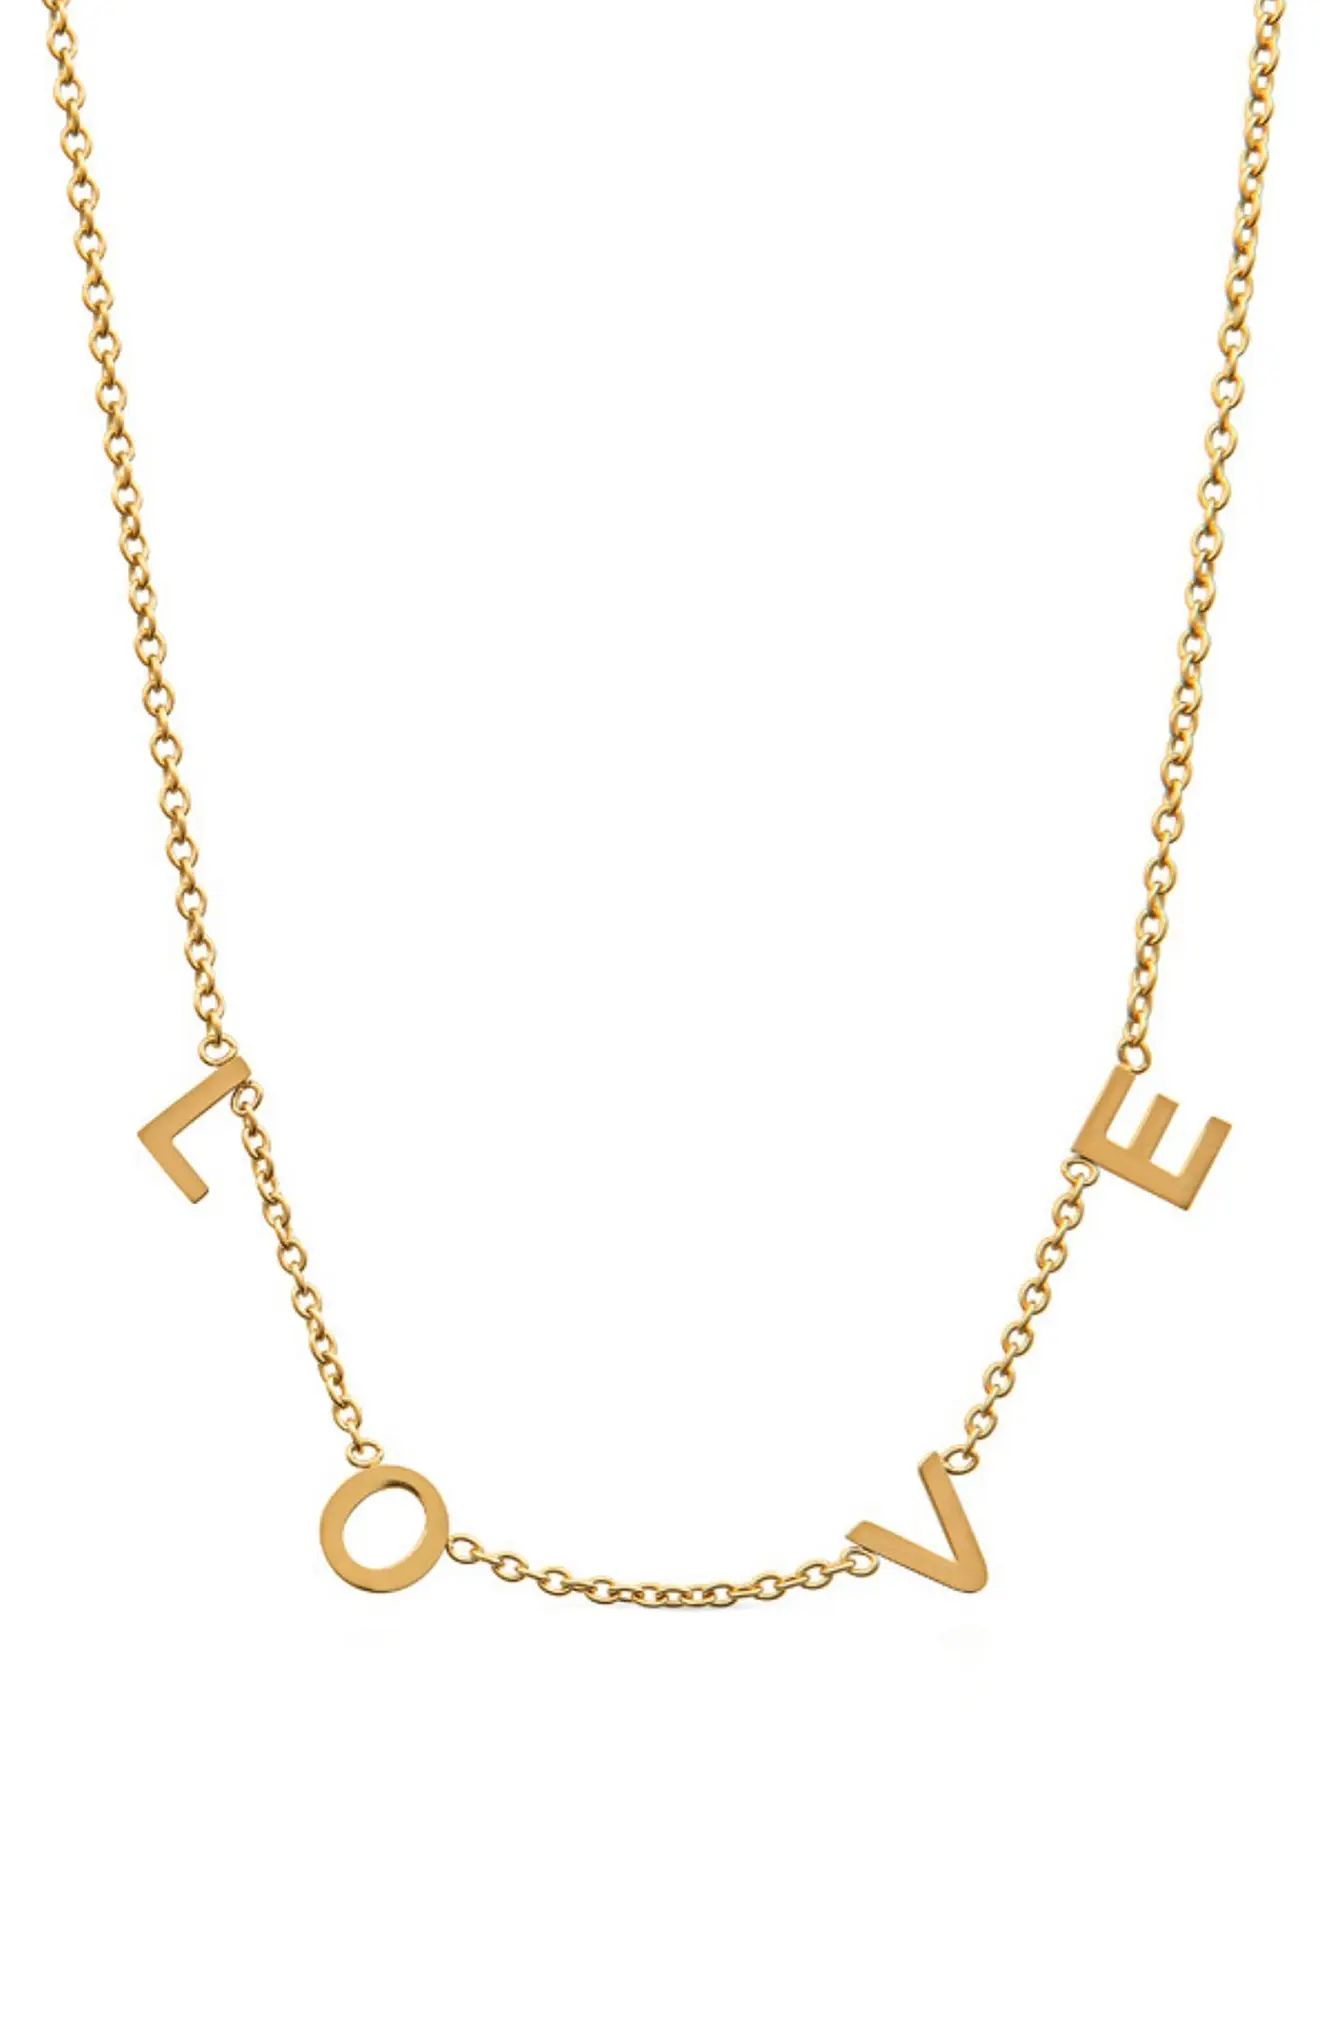 Christina Greene Love Letter Station Necklace in Yellow Gold at Nordstrom | Nordstrom